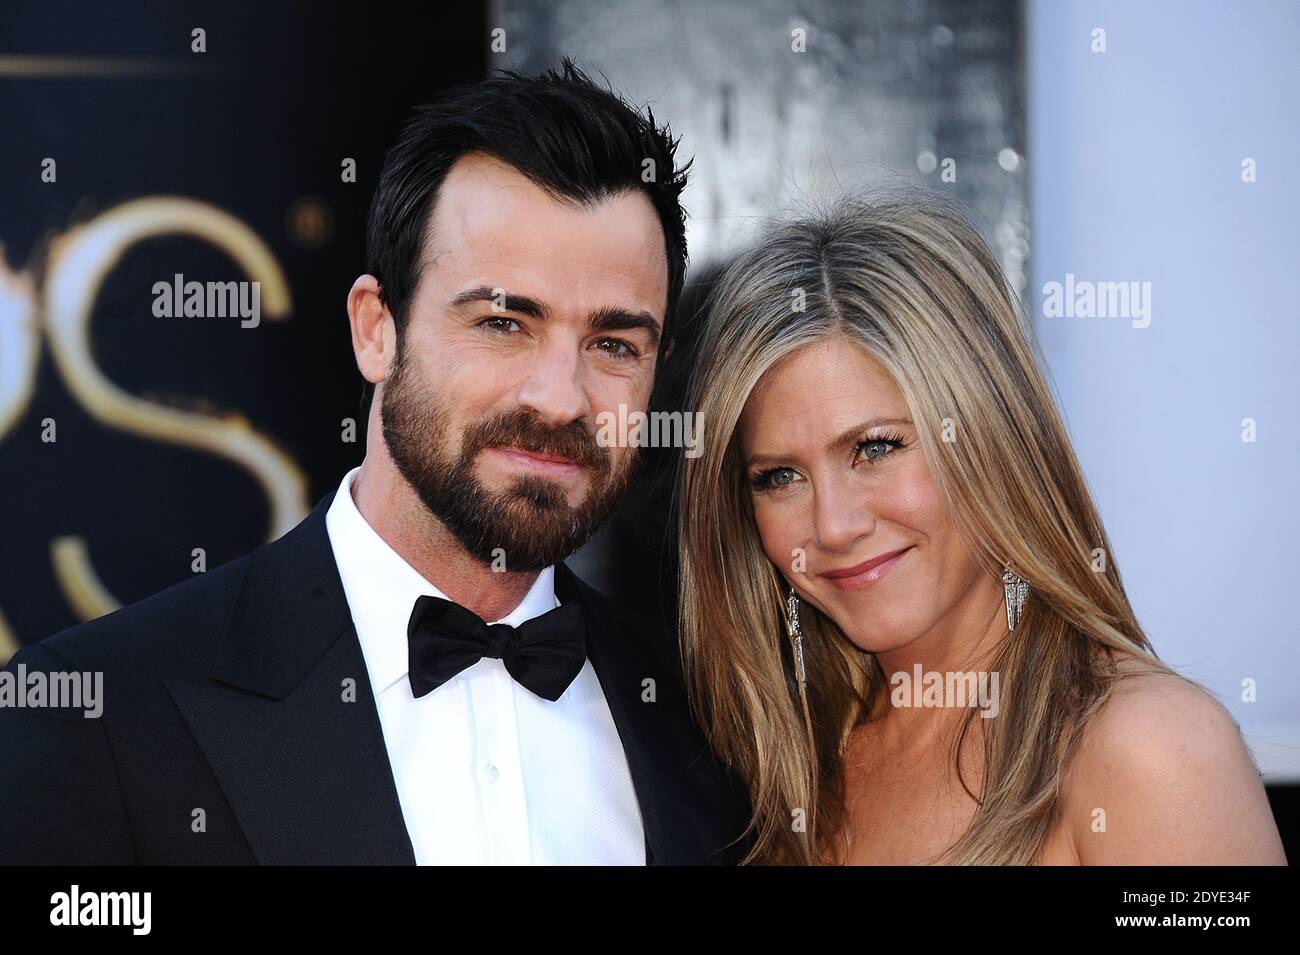 Actress Jennifer Aniston attends the Louis Vuitton's Dinner for